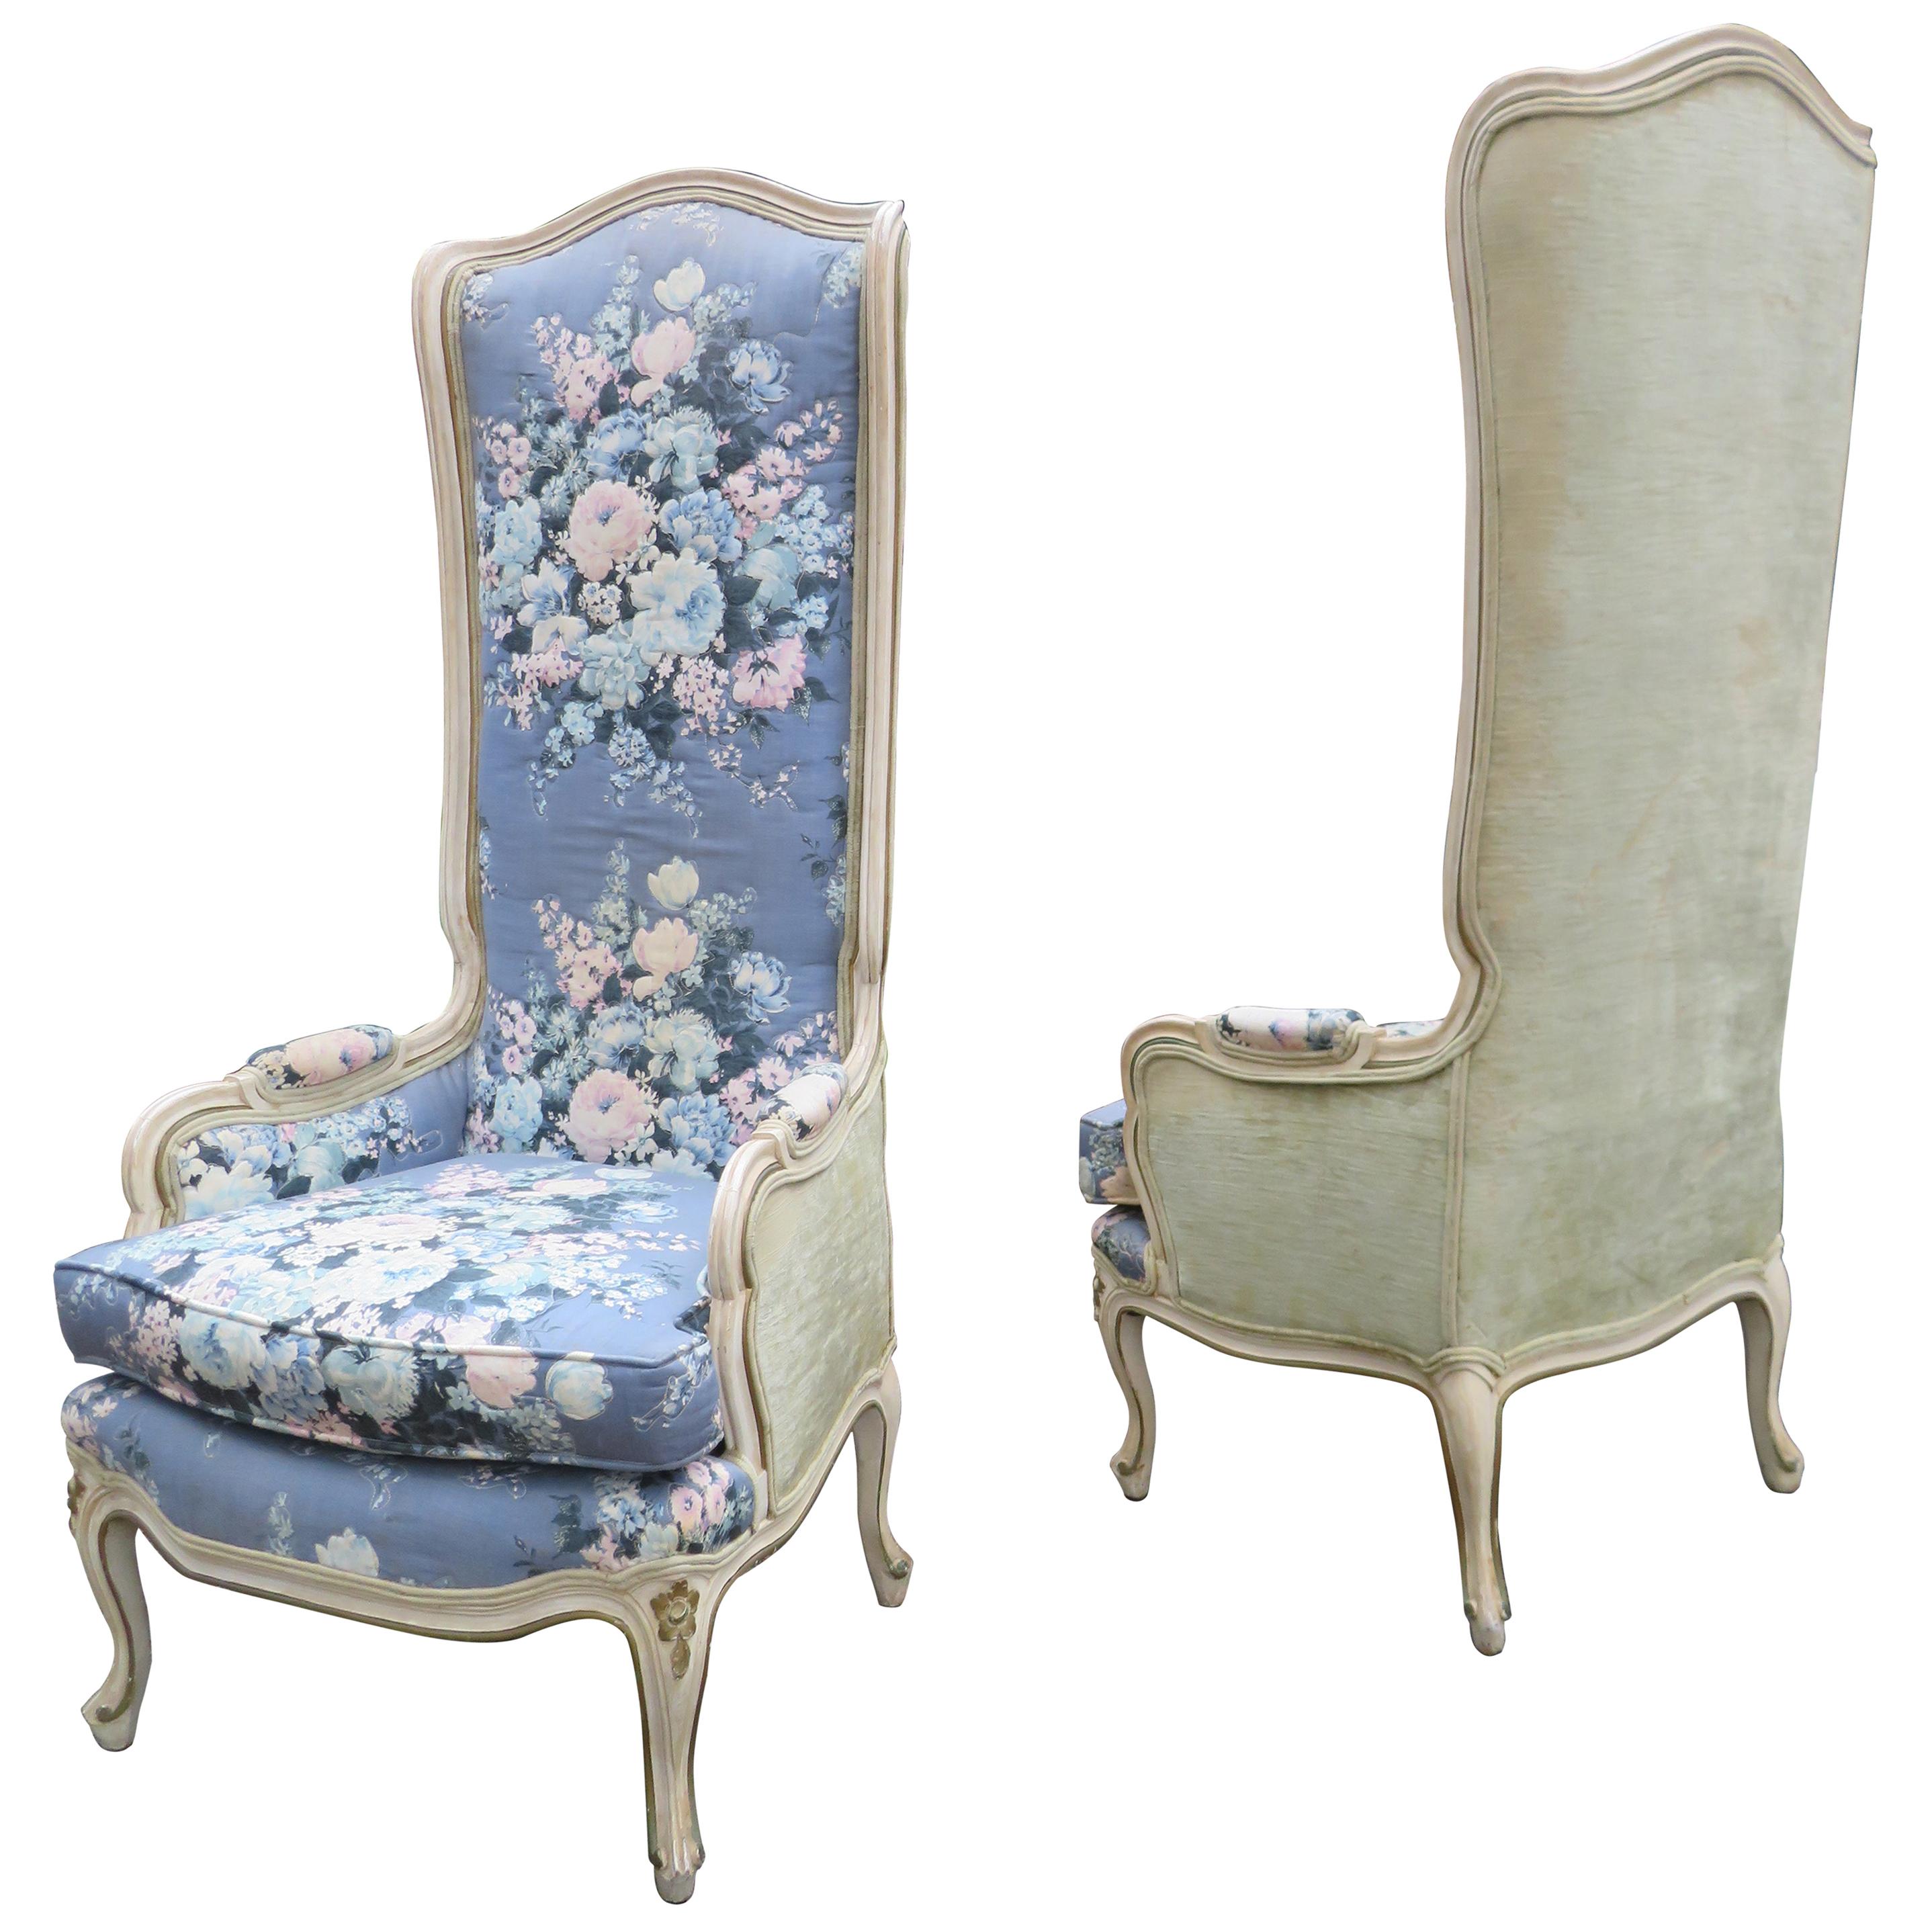 Lovely Pair of Statuesque French Country Wingback Chairs Midcentury